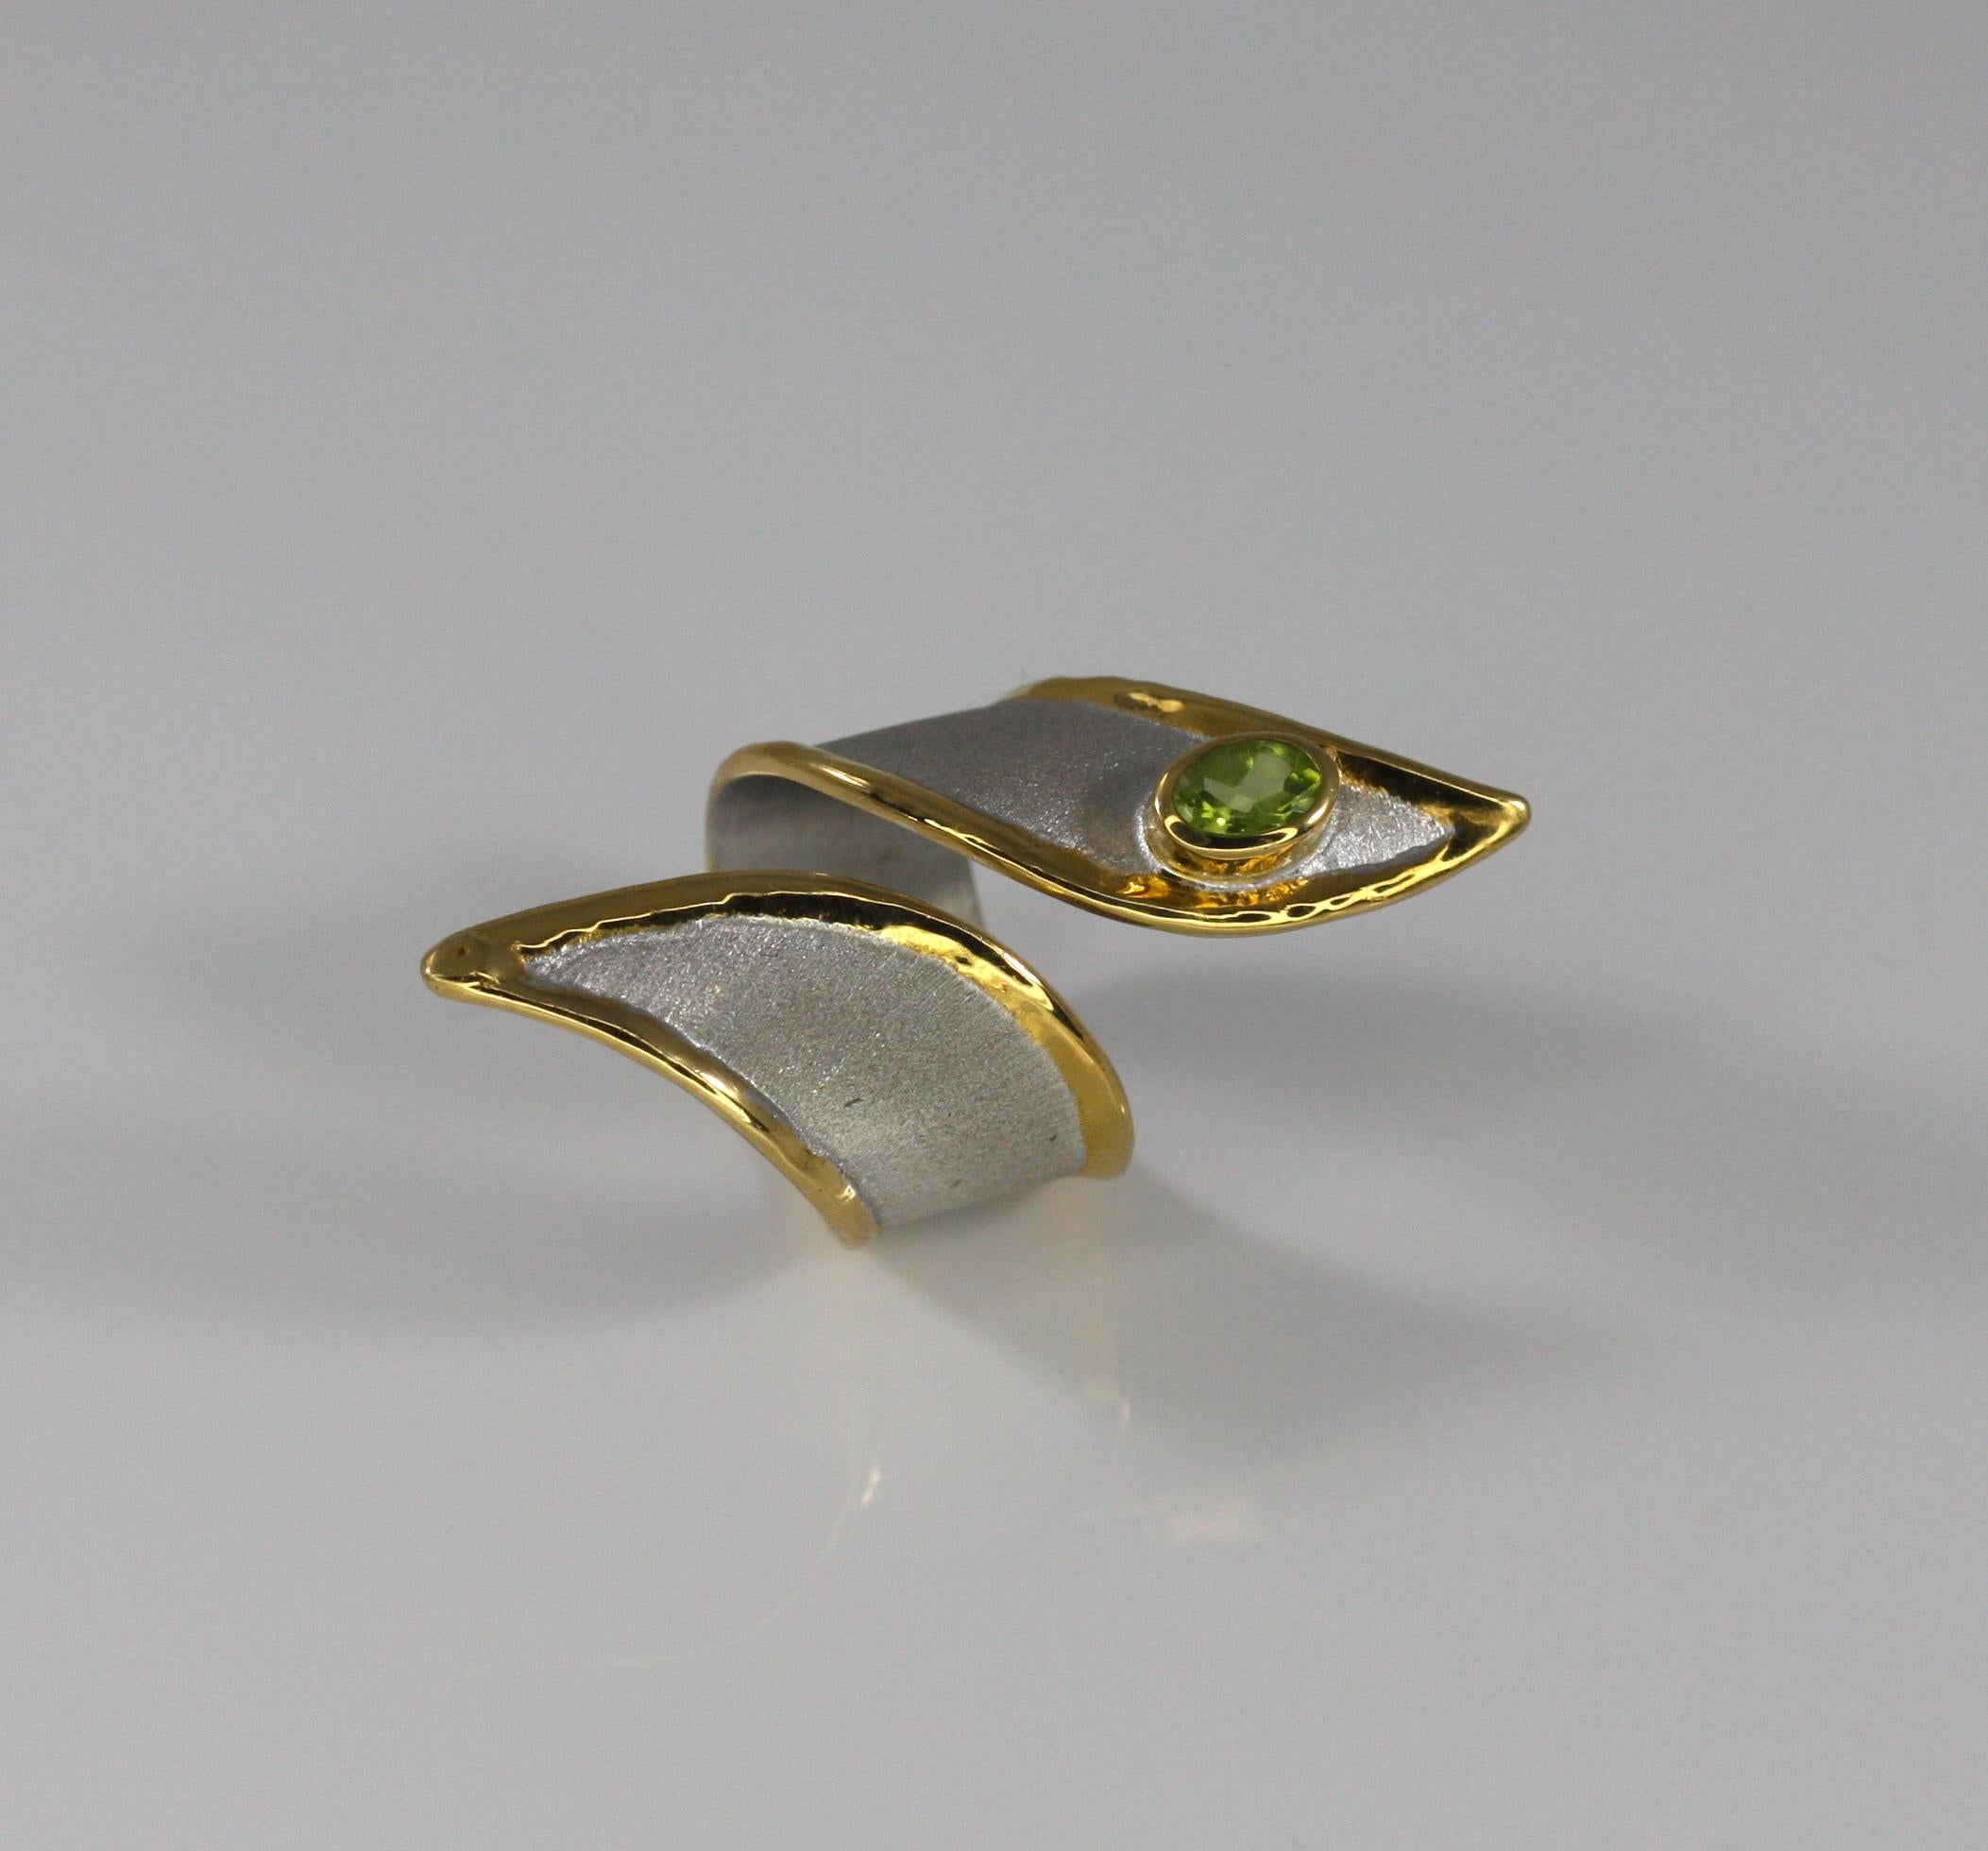 This is Yianni Creations Artisan Ring from Midas Collection 100% Handmade from Fine Silver 950 purity of silver featuring 0.50 Carat Peridot. The ring is crafted using ancient techniques of craftsmanship - brushed texture and nature-inspired liquid